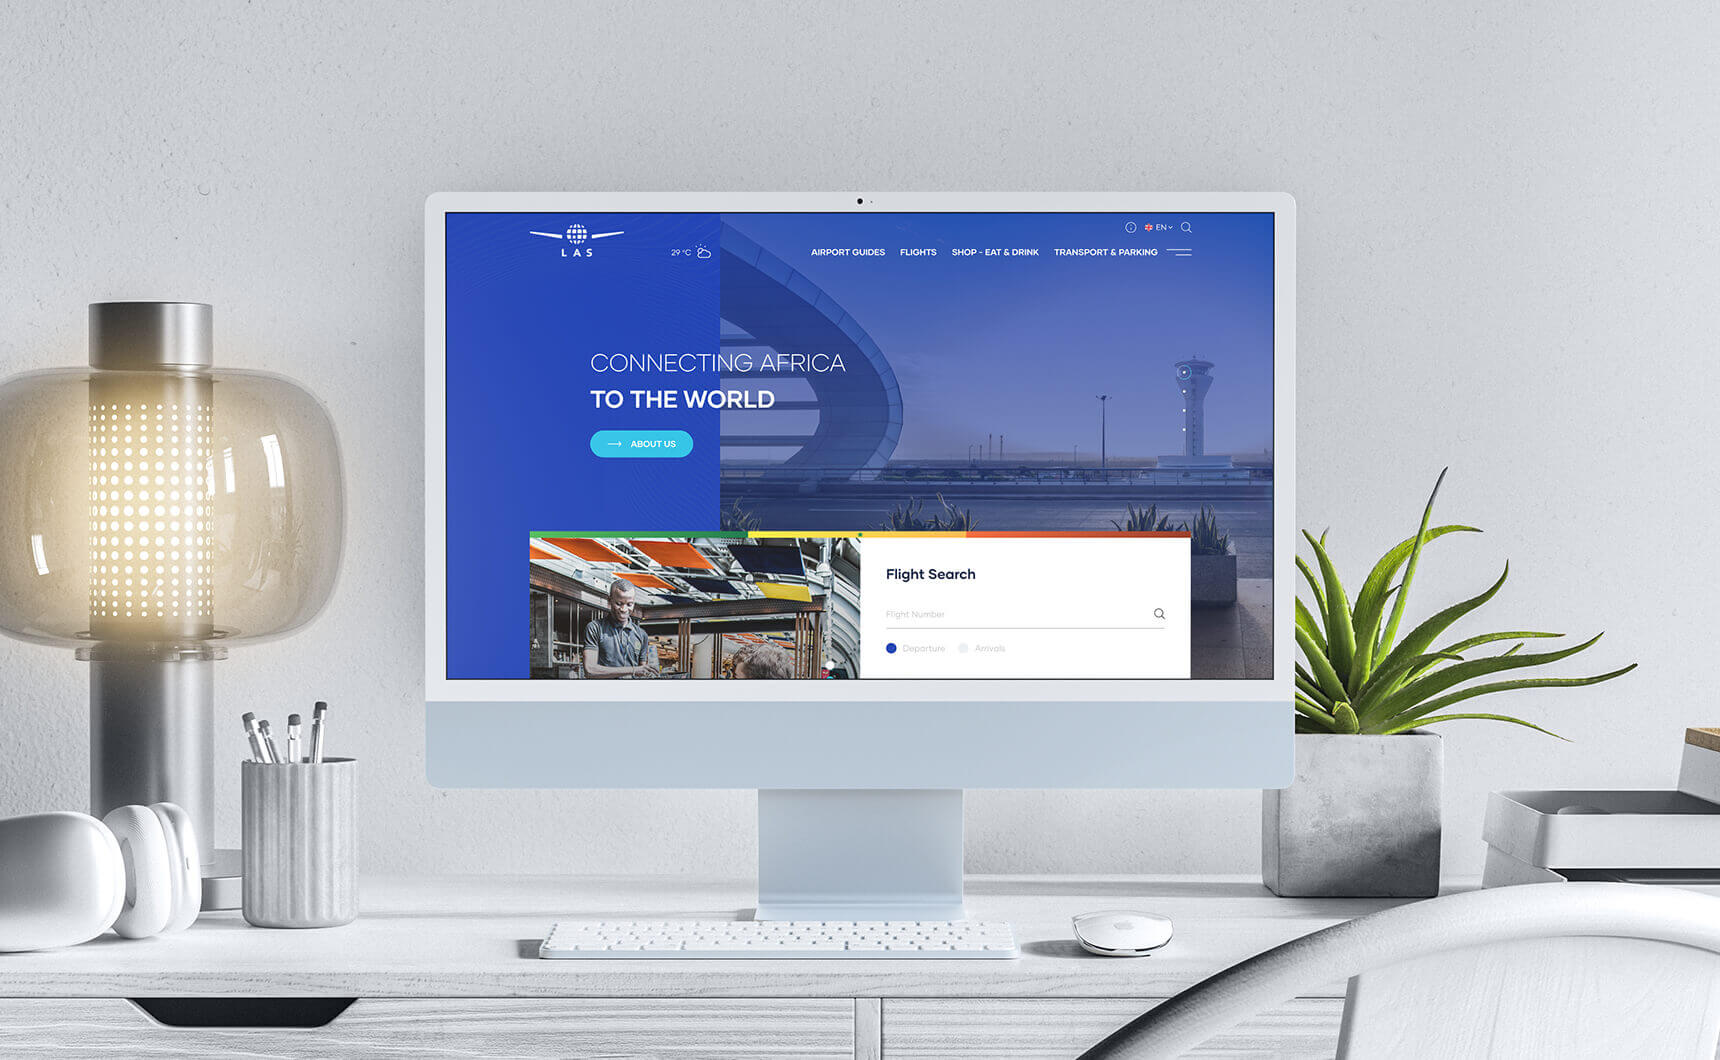 Dakar Aeroport-2 - wrinting 1-3 - web promo-5 - website-page-6 - app-mockup-7- home-page-8 - type-9 - color-10 - web-pages-11 - laptop-mockup-12 - mobil-page-13 - tablet-screen-14 - phone-tablet mockup-15 - web-pages-16 - imac-mockup